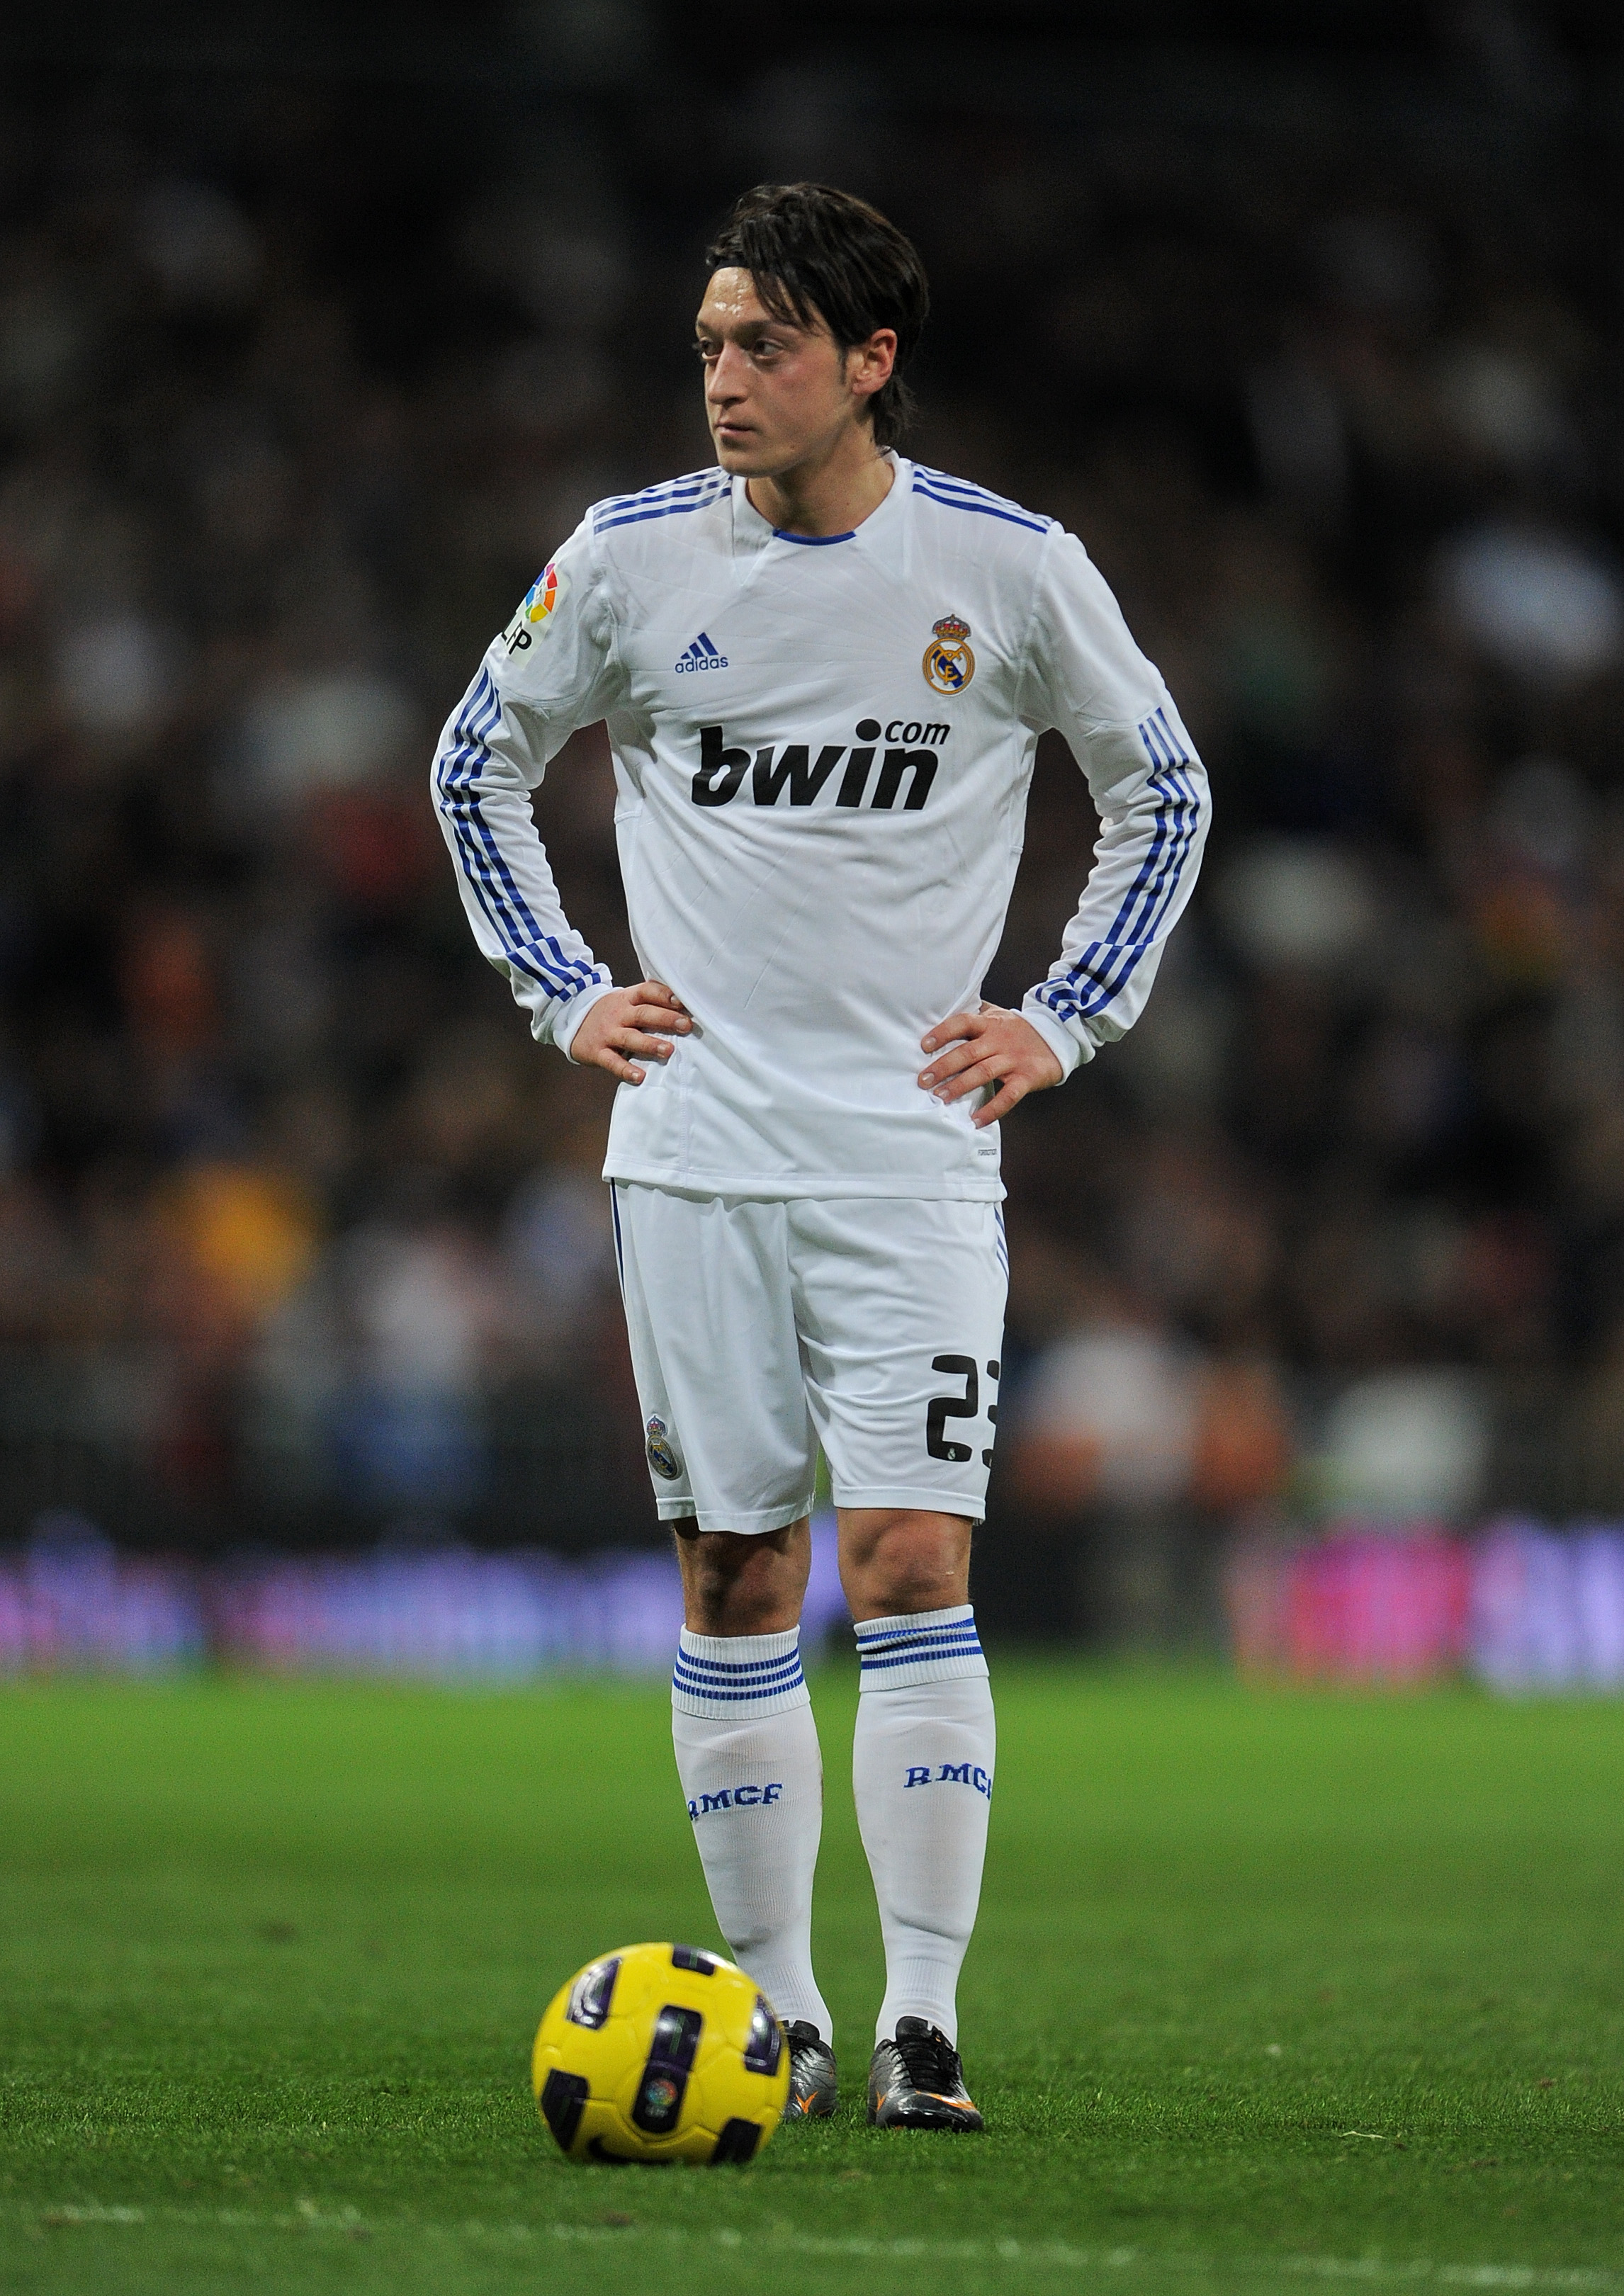 MADRID, SPAIN - JANUARY 23:  Mesut Ozil of Real Madrid lines up a free kick during the la liga match between Real Madrid and Mallorca at Estadio Santiago Bernabeu on January  23, 2011 in Madrid, Spain.  (Photo by Jasper Juinen/Getty Images)